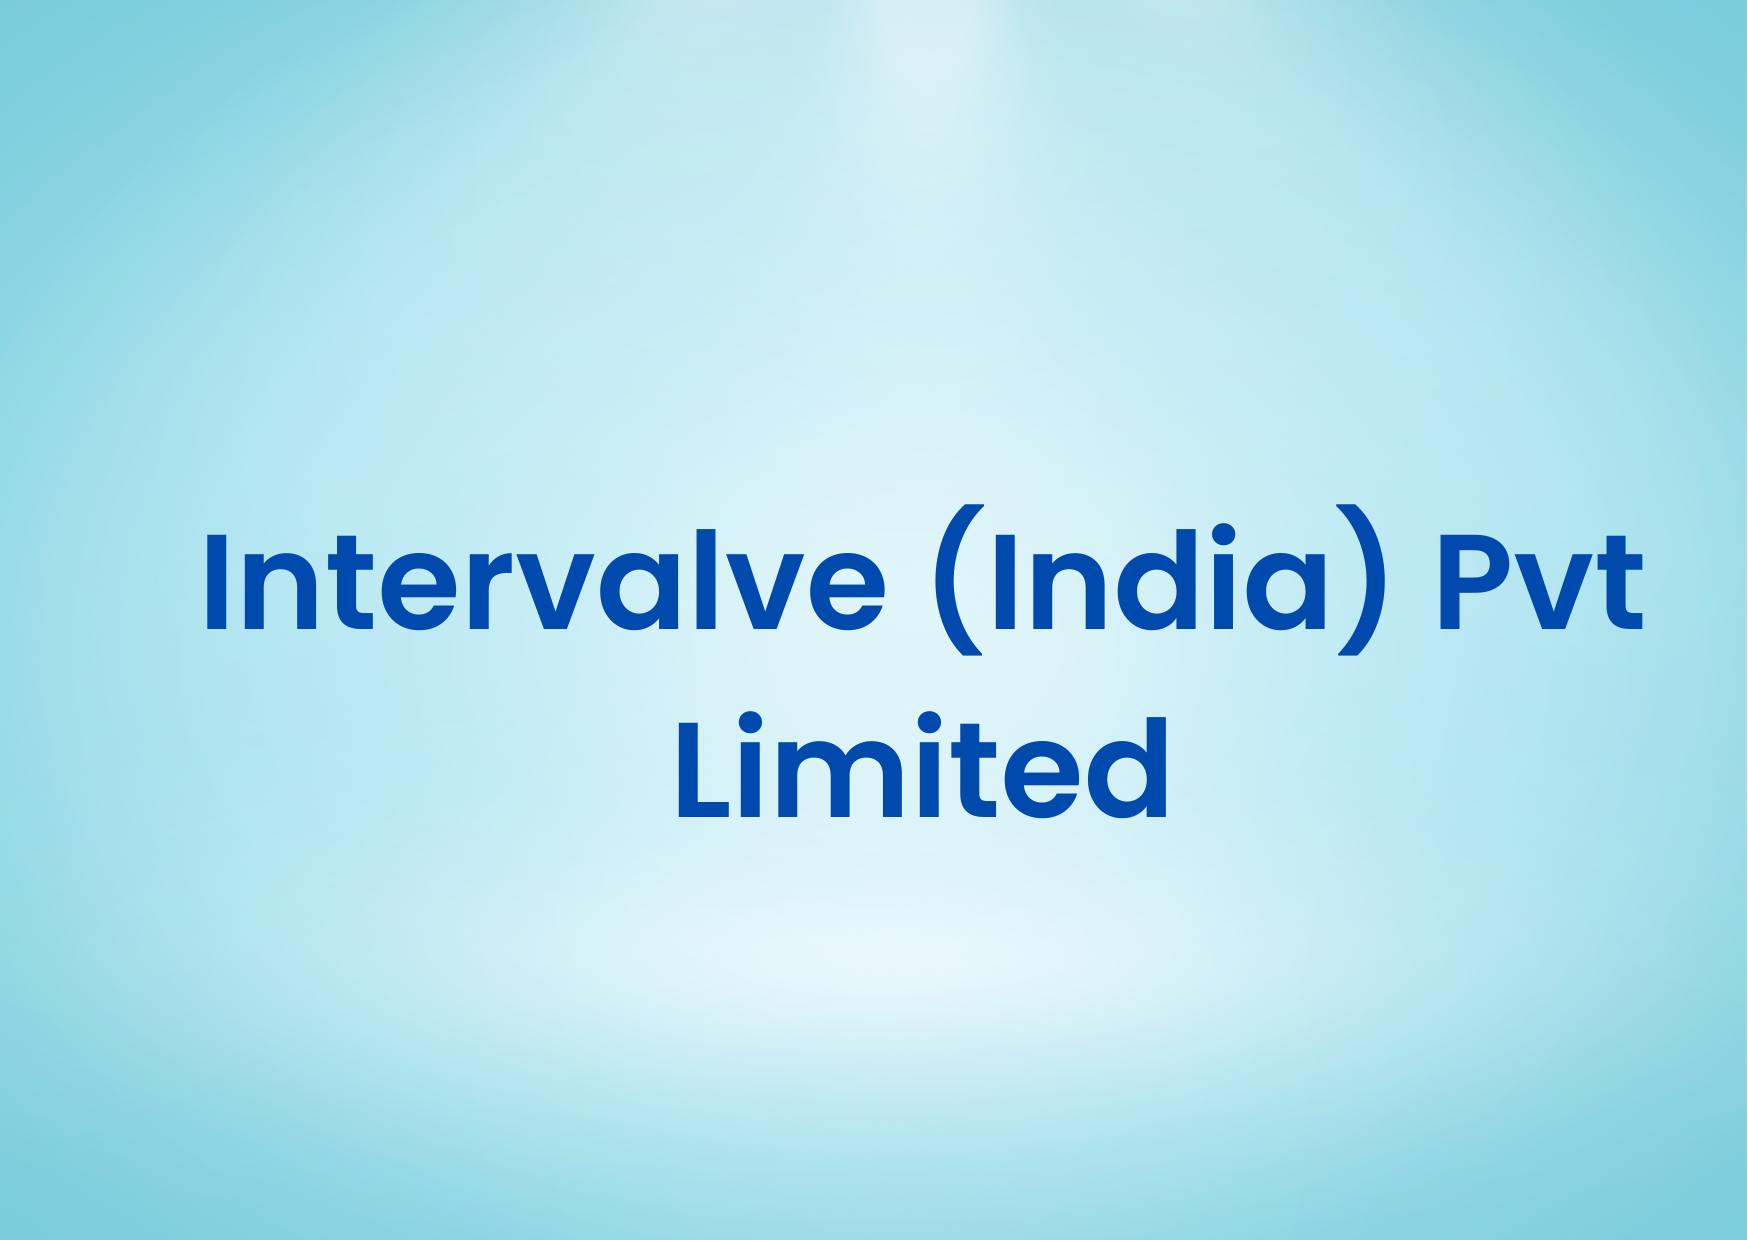 Intervalve (India) Pvt Limited,   